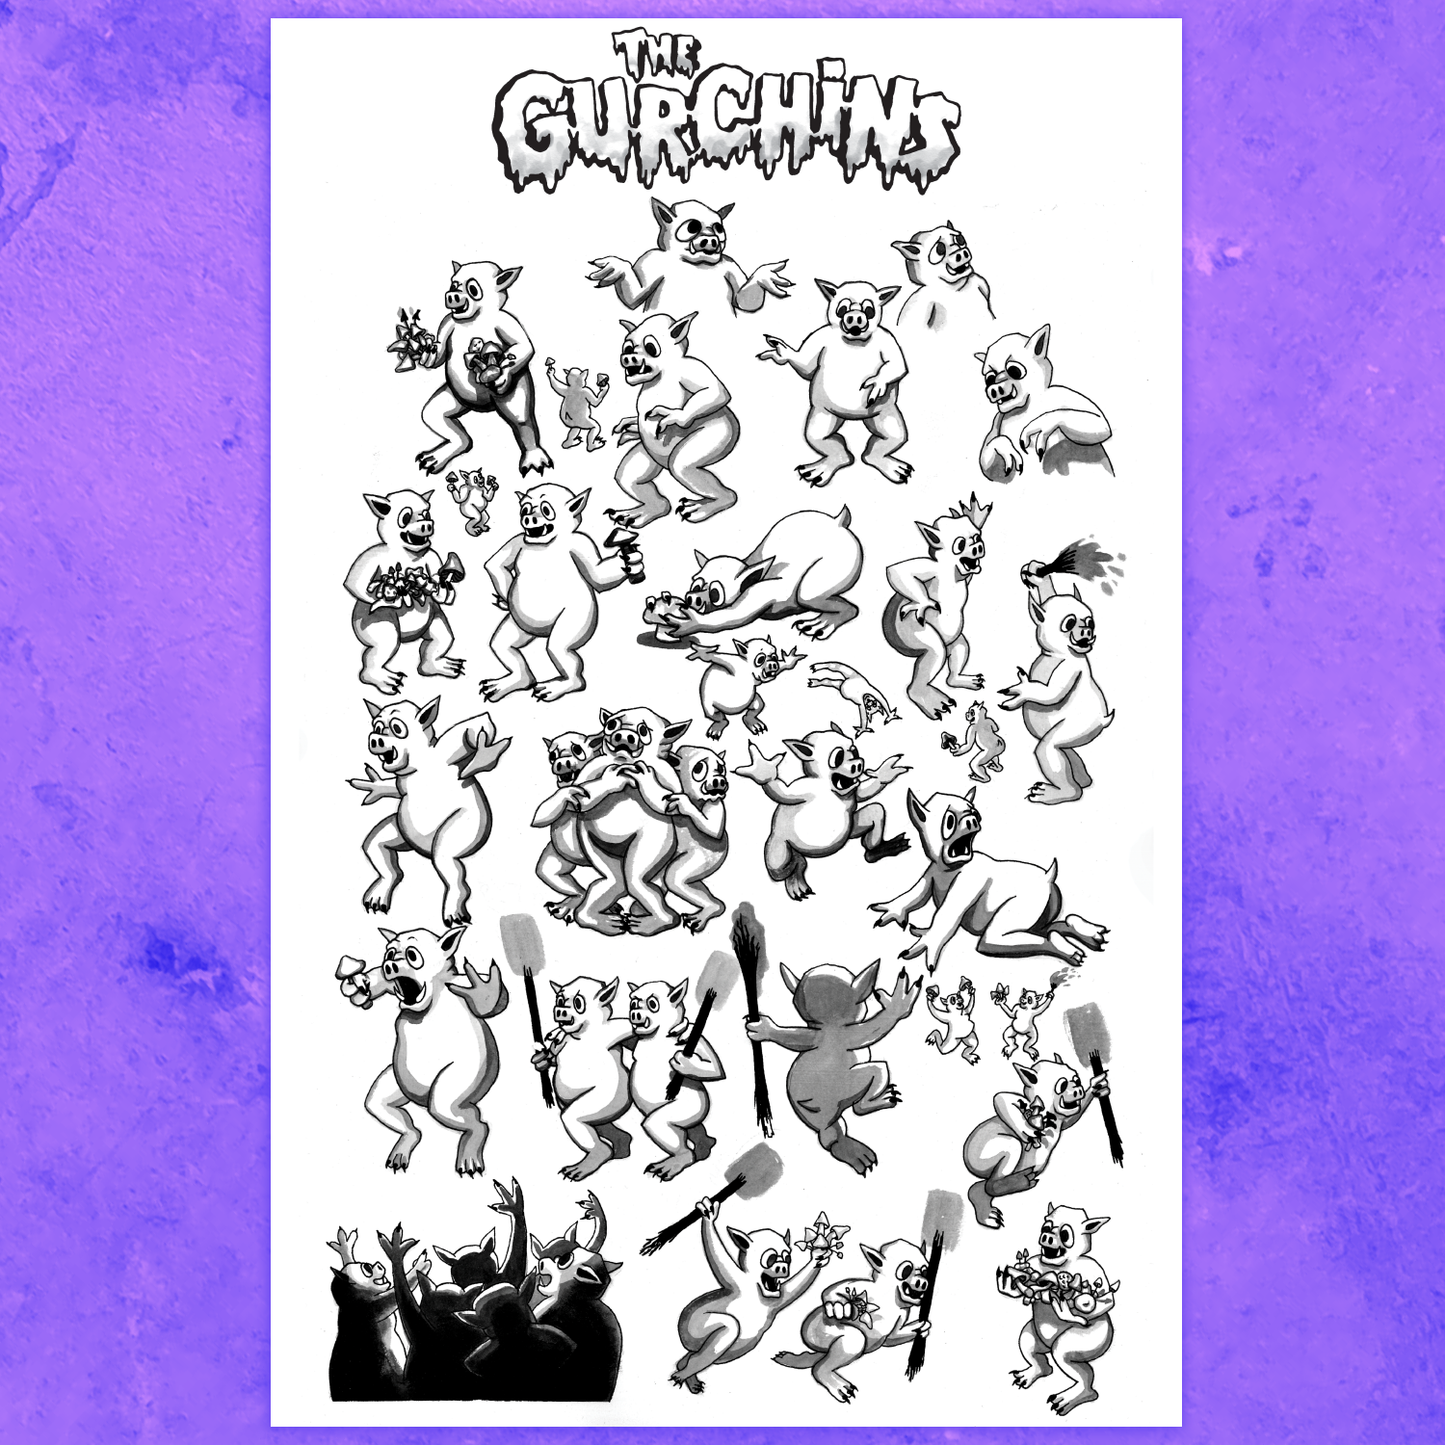 THE GURCHINS POSTER